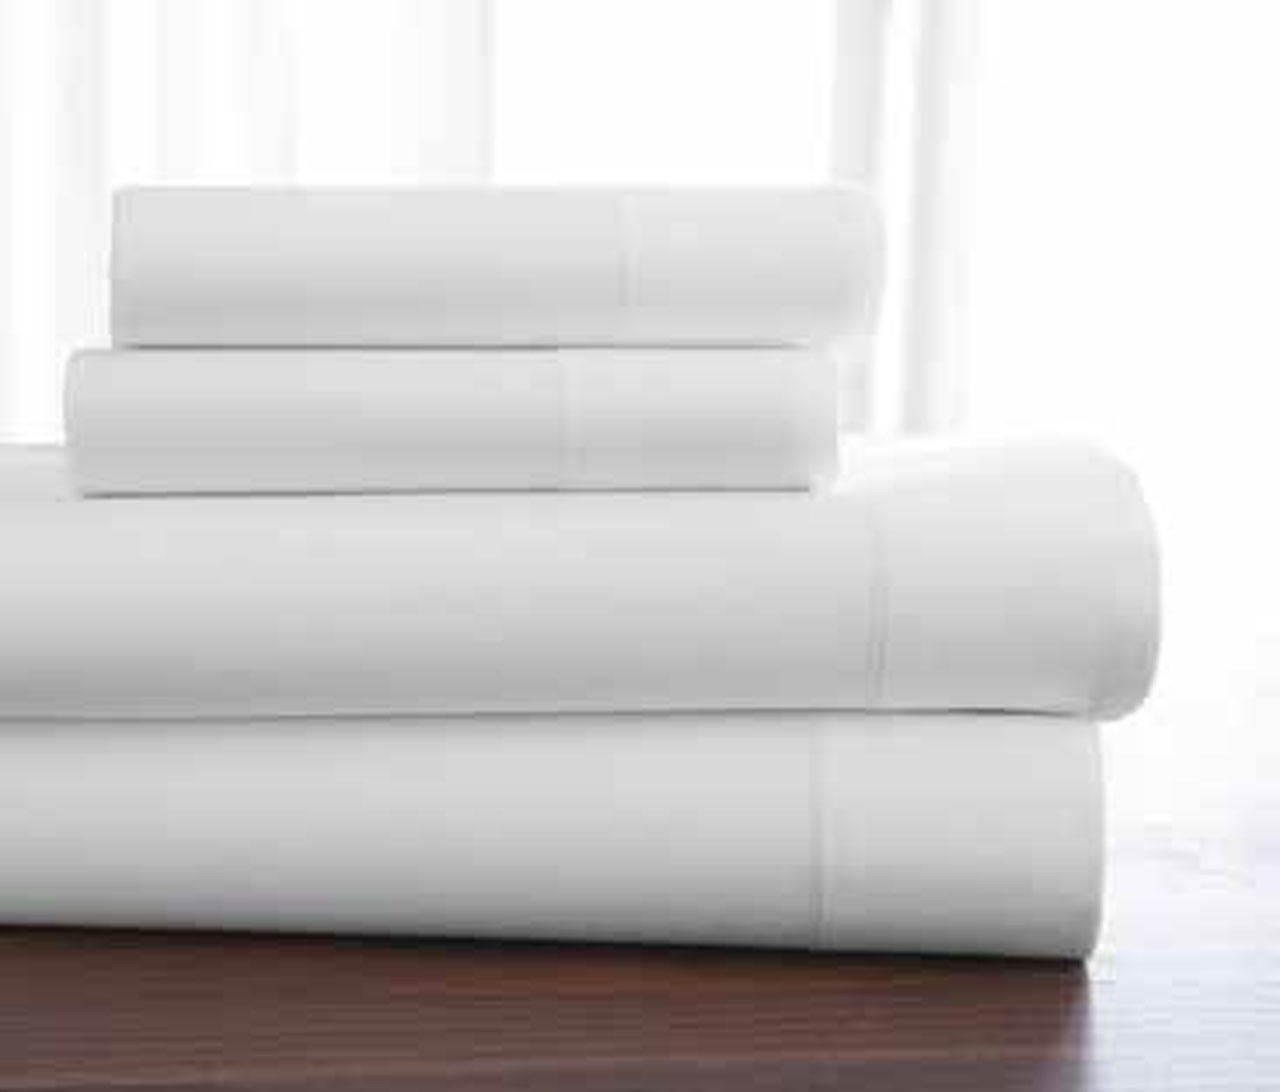 From where are these Welspun T-400 Premium Hygrocotton sheets shipped?